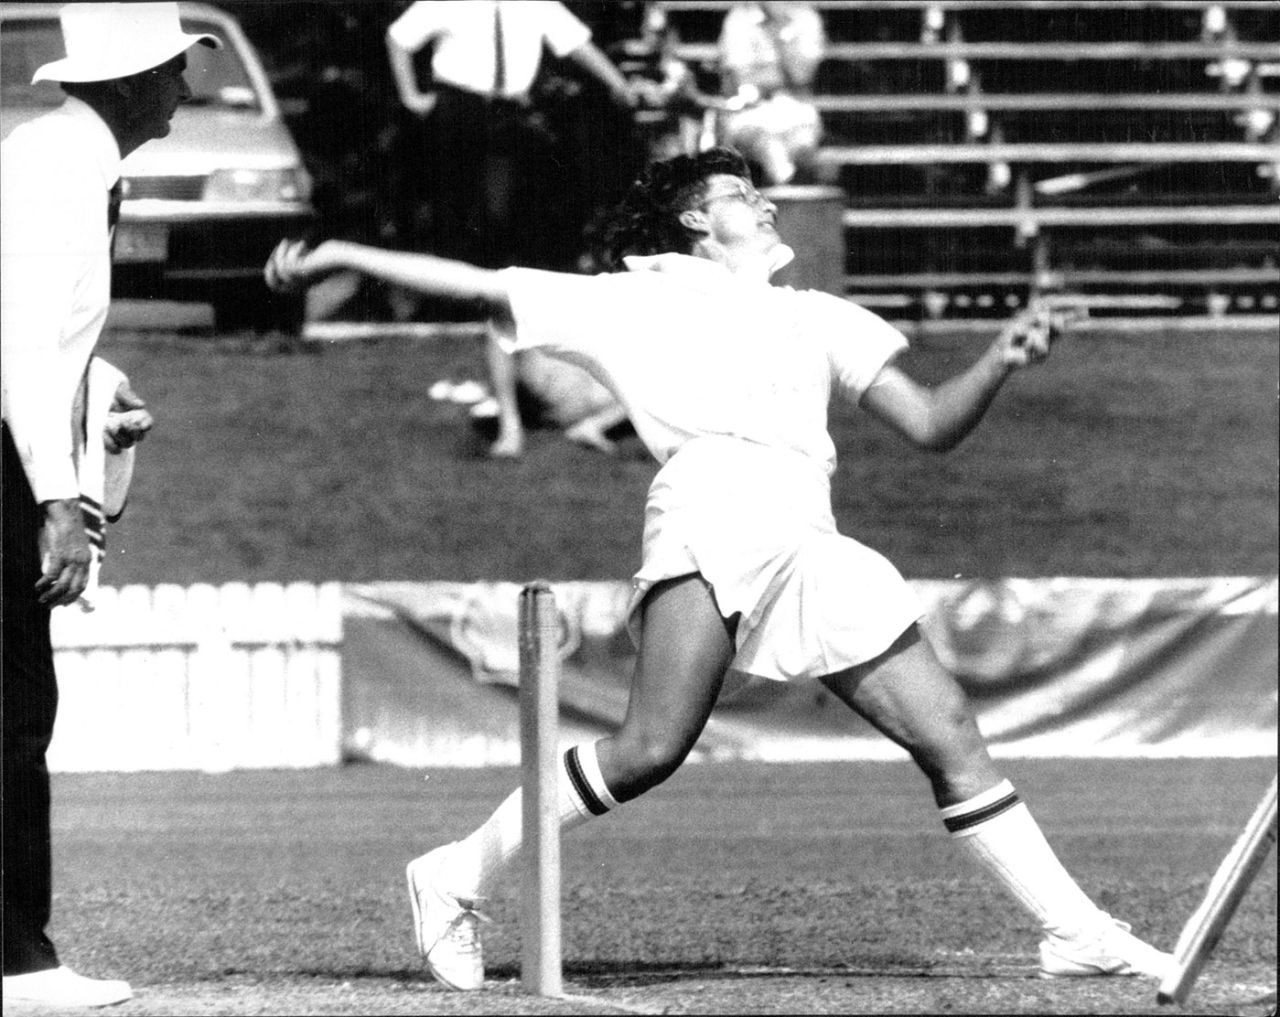 Sharon Tredrea bowls against New Zealand in 1988